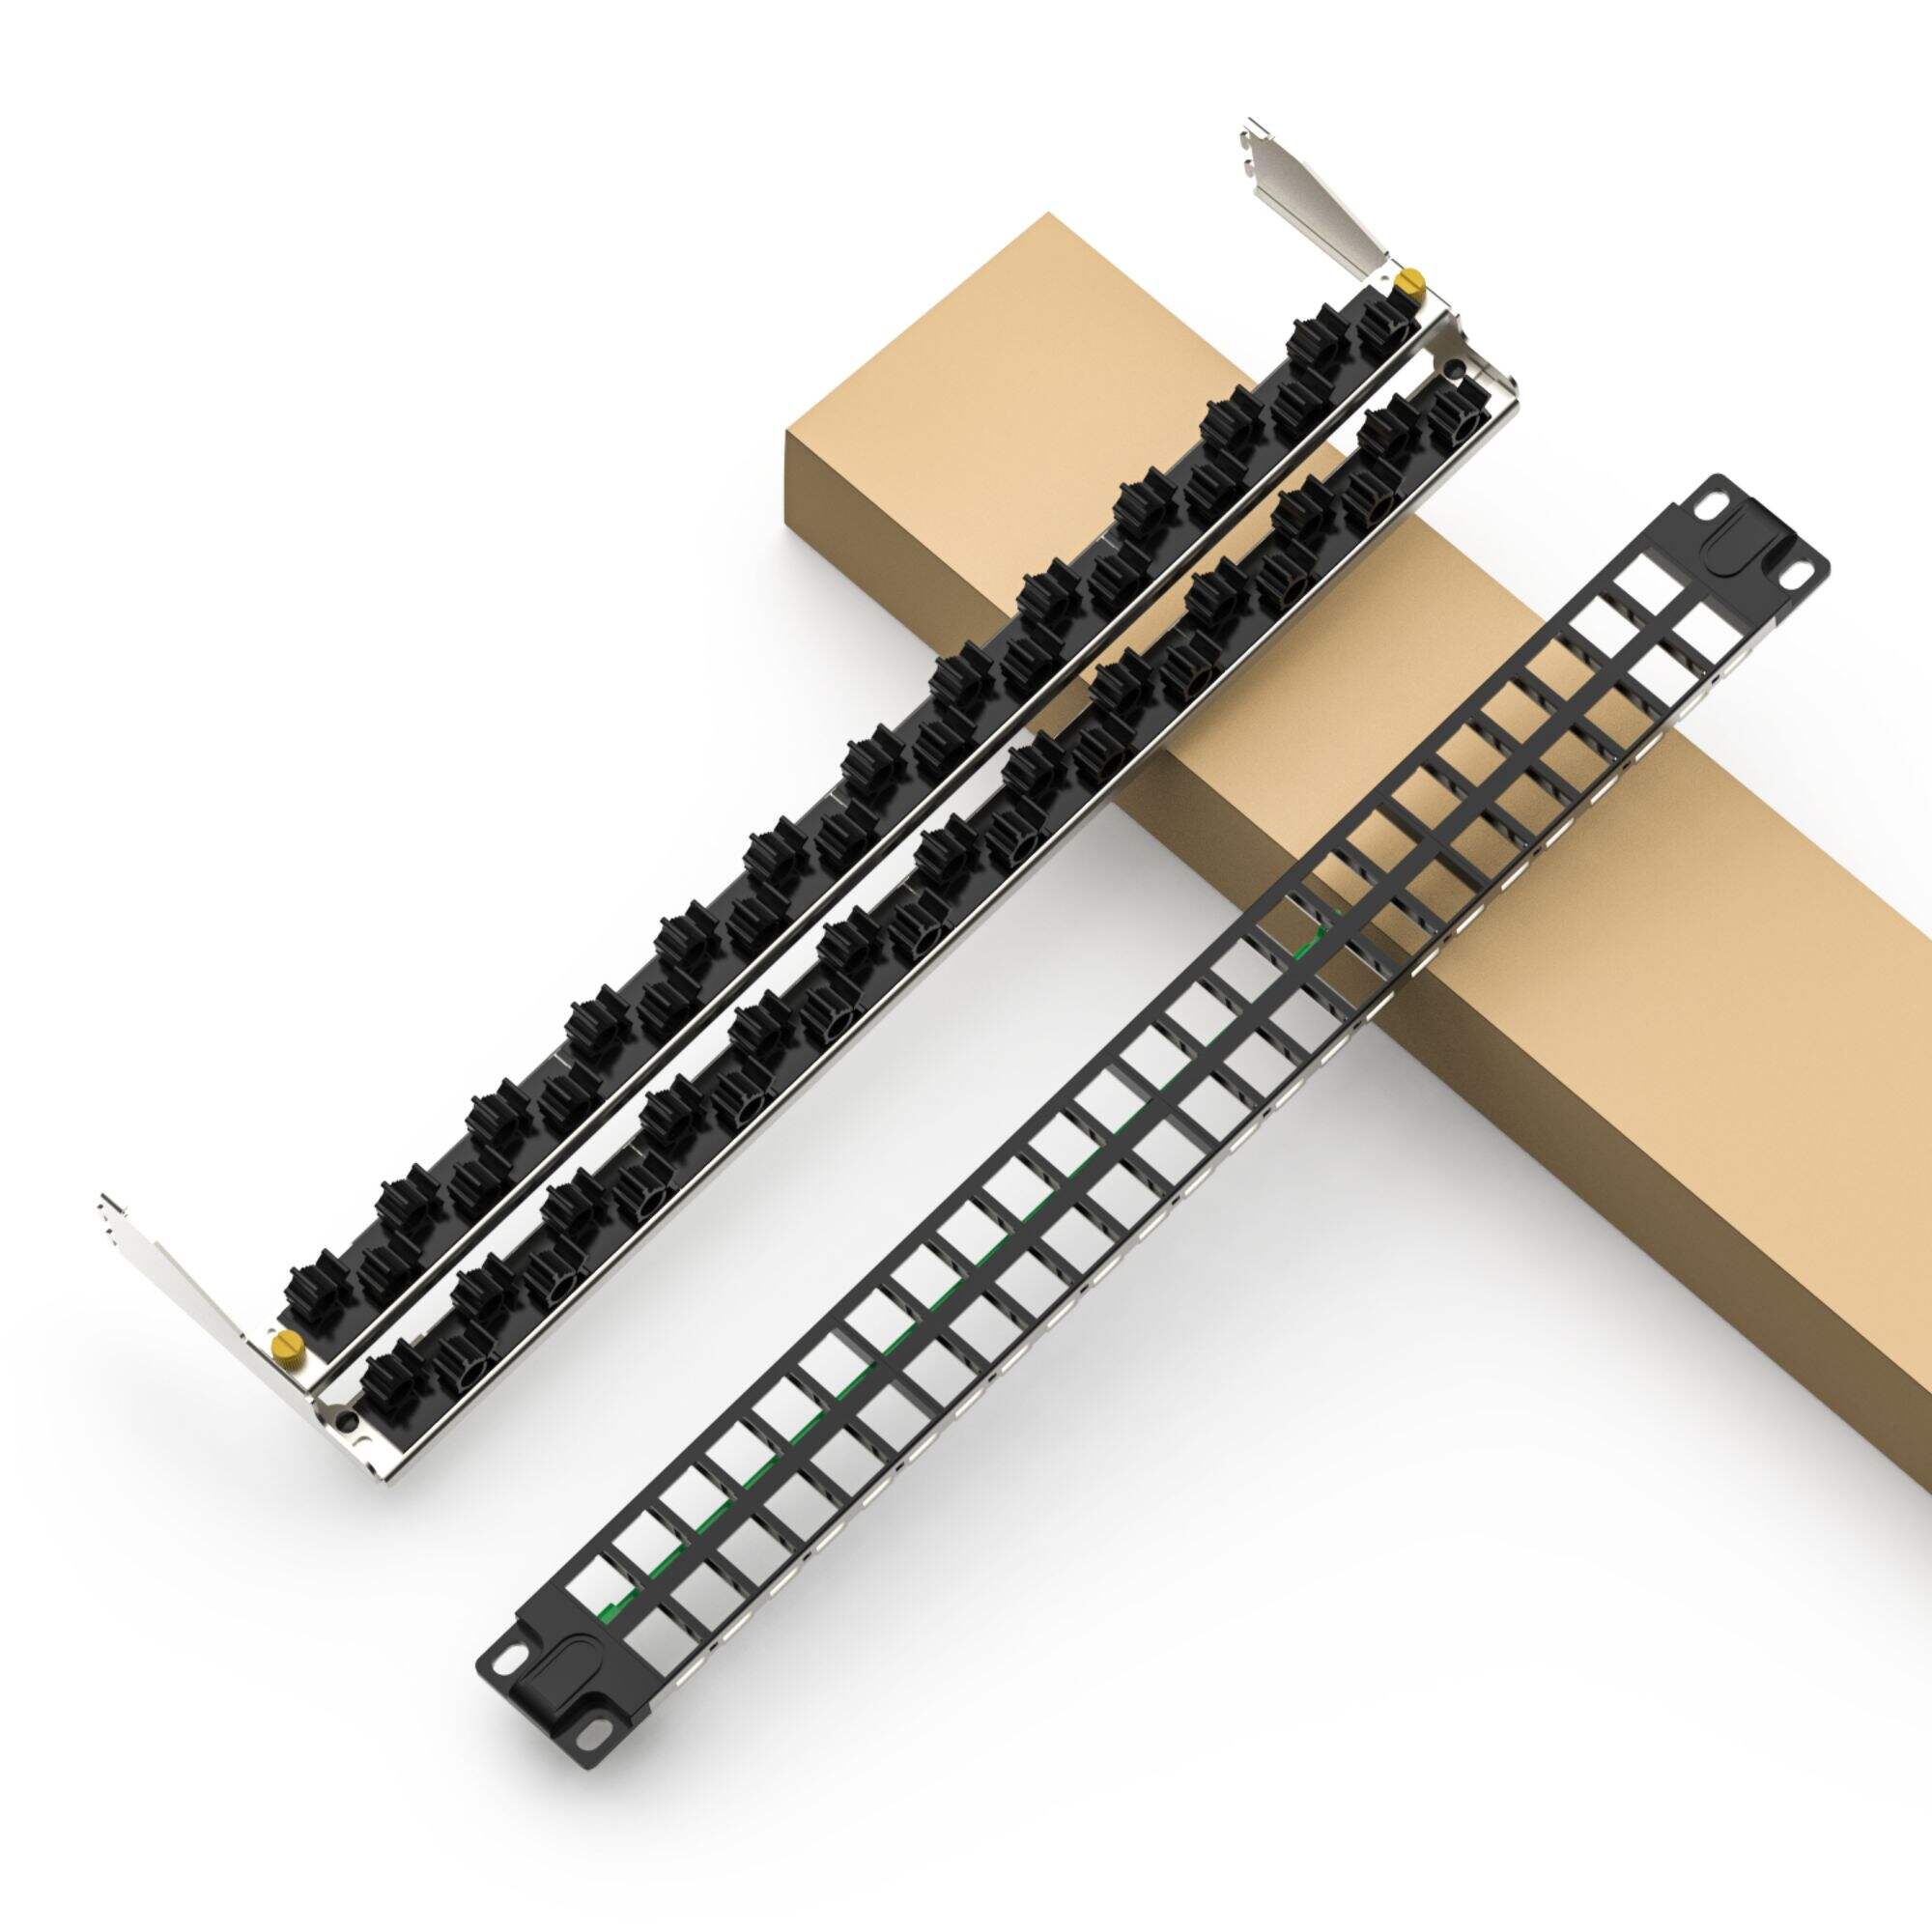 Network 1U 48 port FTP unshielded blank patch panel 48-port empty patch panel with rear strip